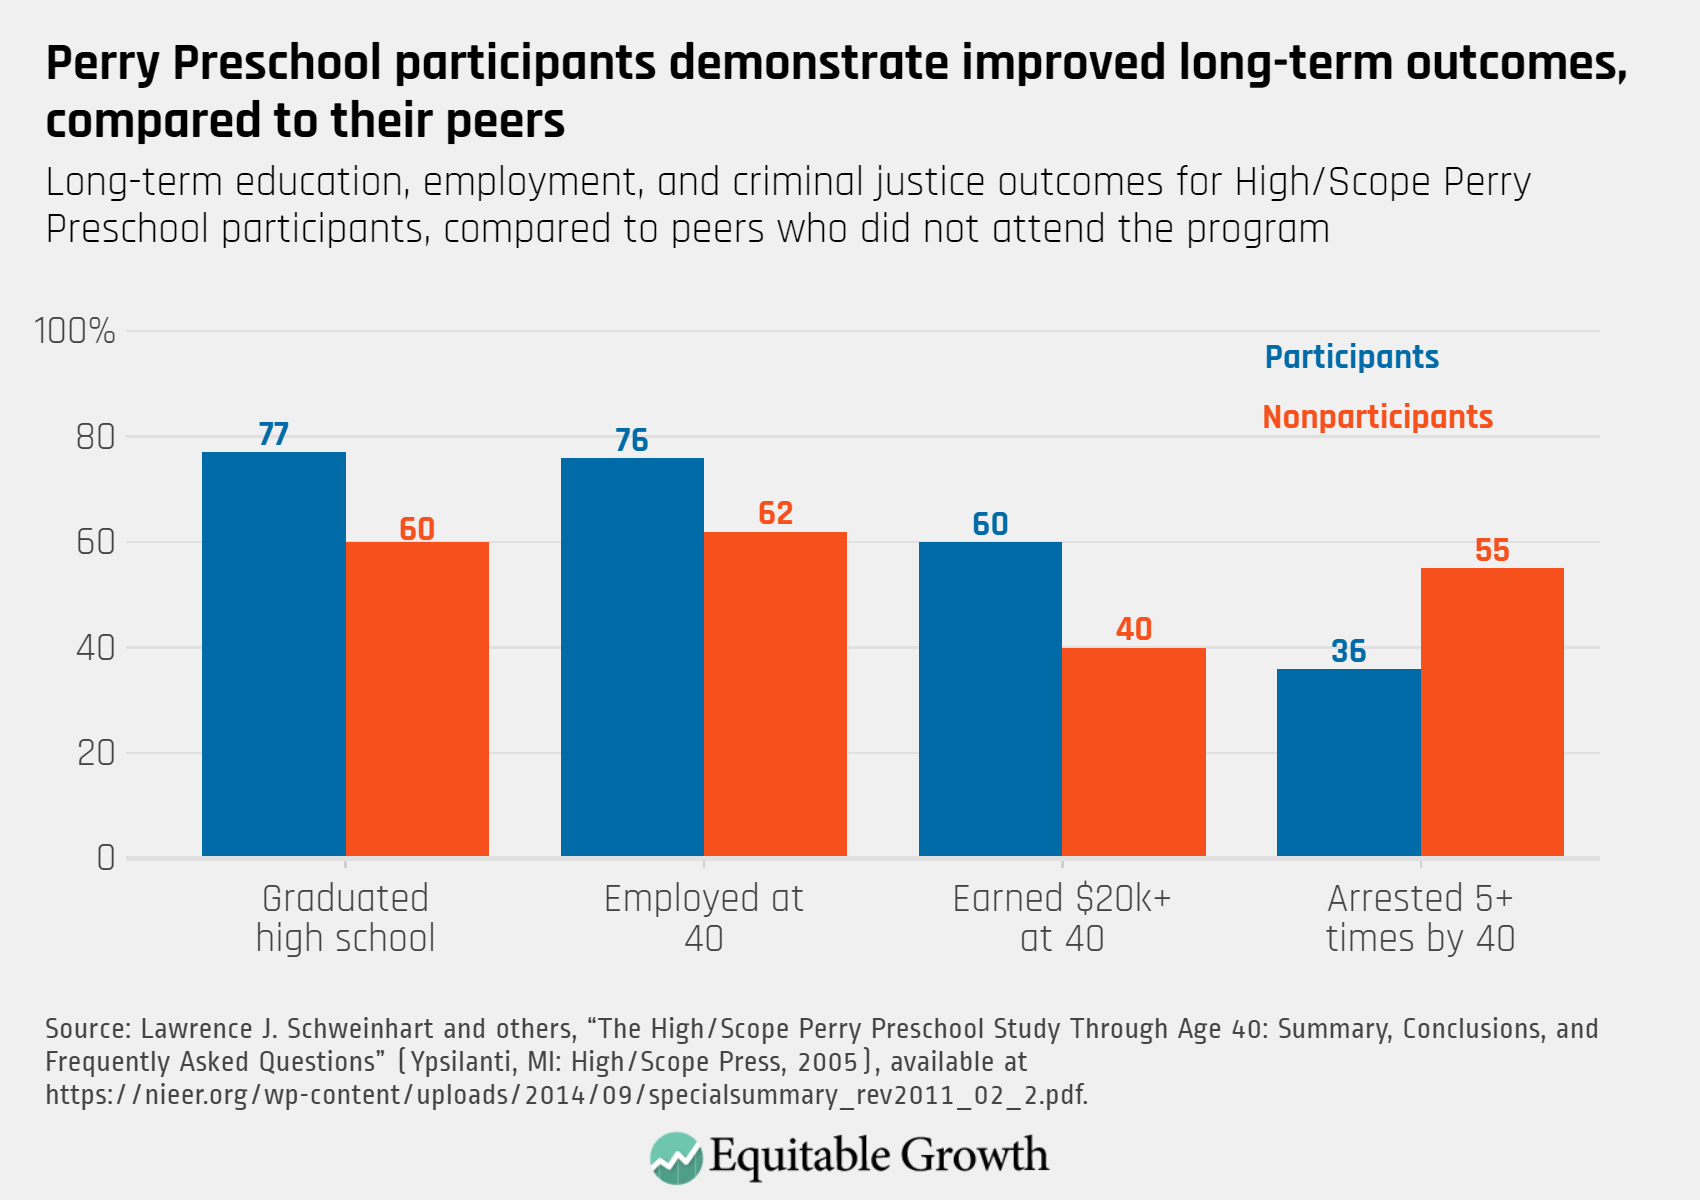 Long-term education, employment, and criminal justice outcomes for High/Scope Perry Preschool participants, compared to peers who did not attend the program